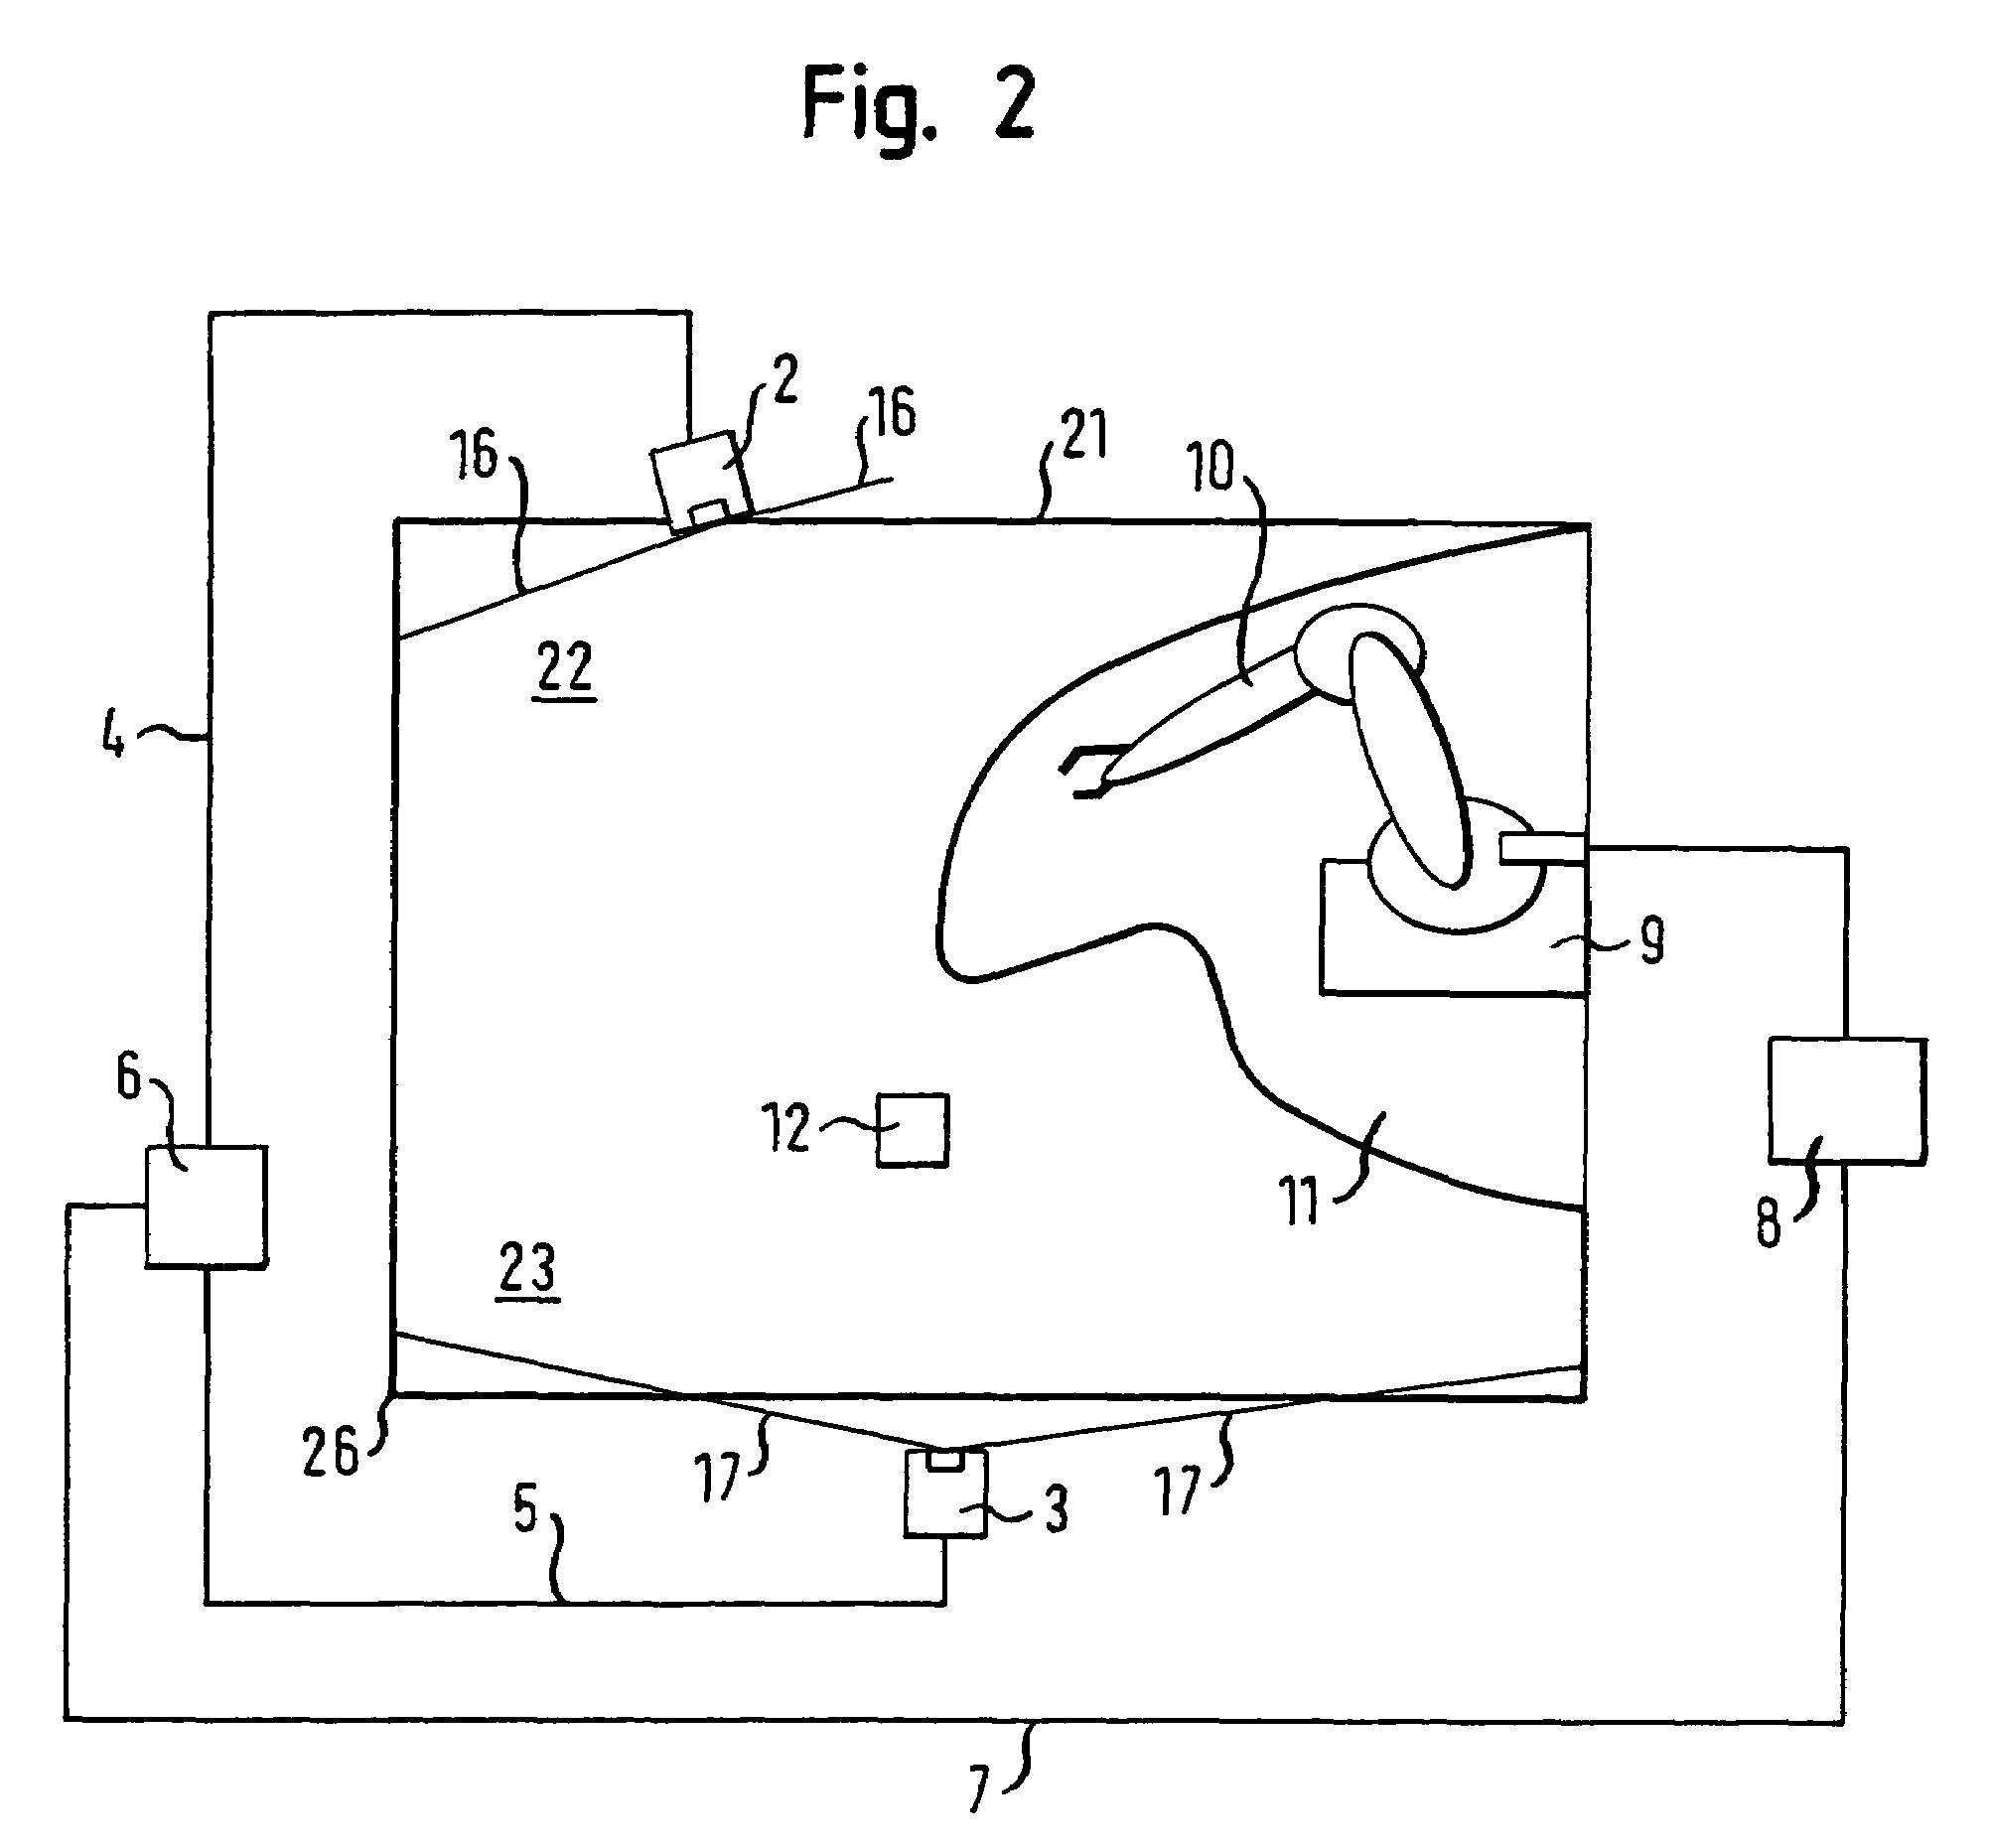 Method and apparatus for detecting an object through the use of multiple sensors